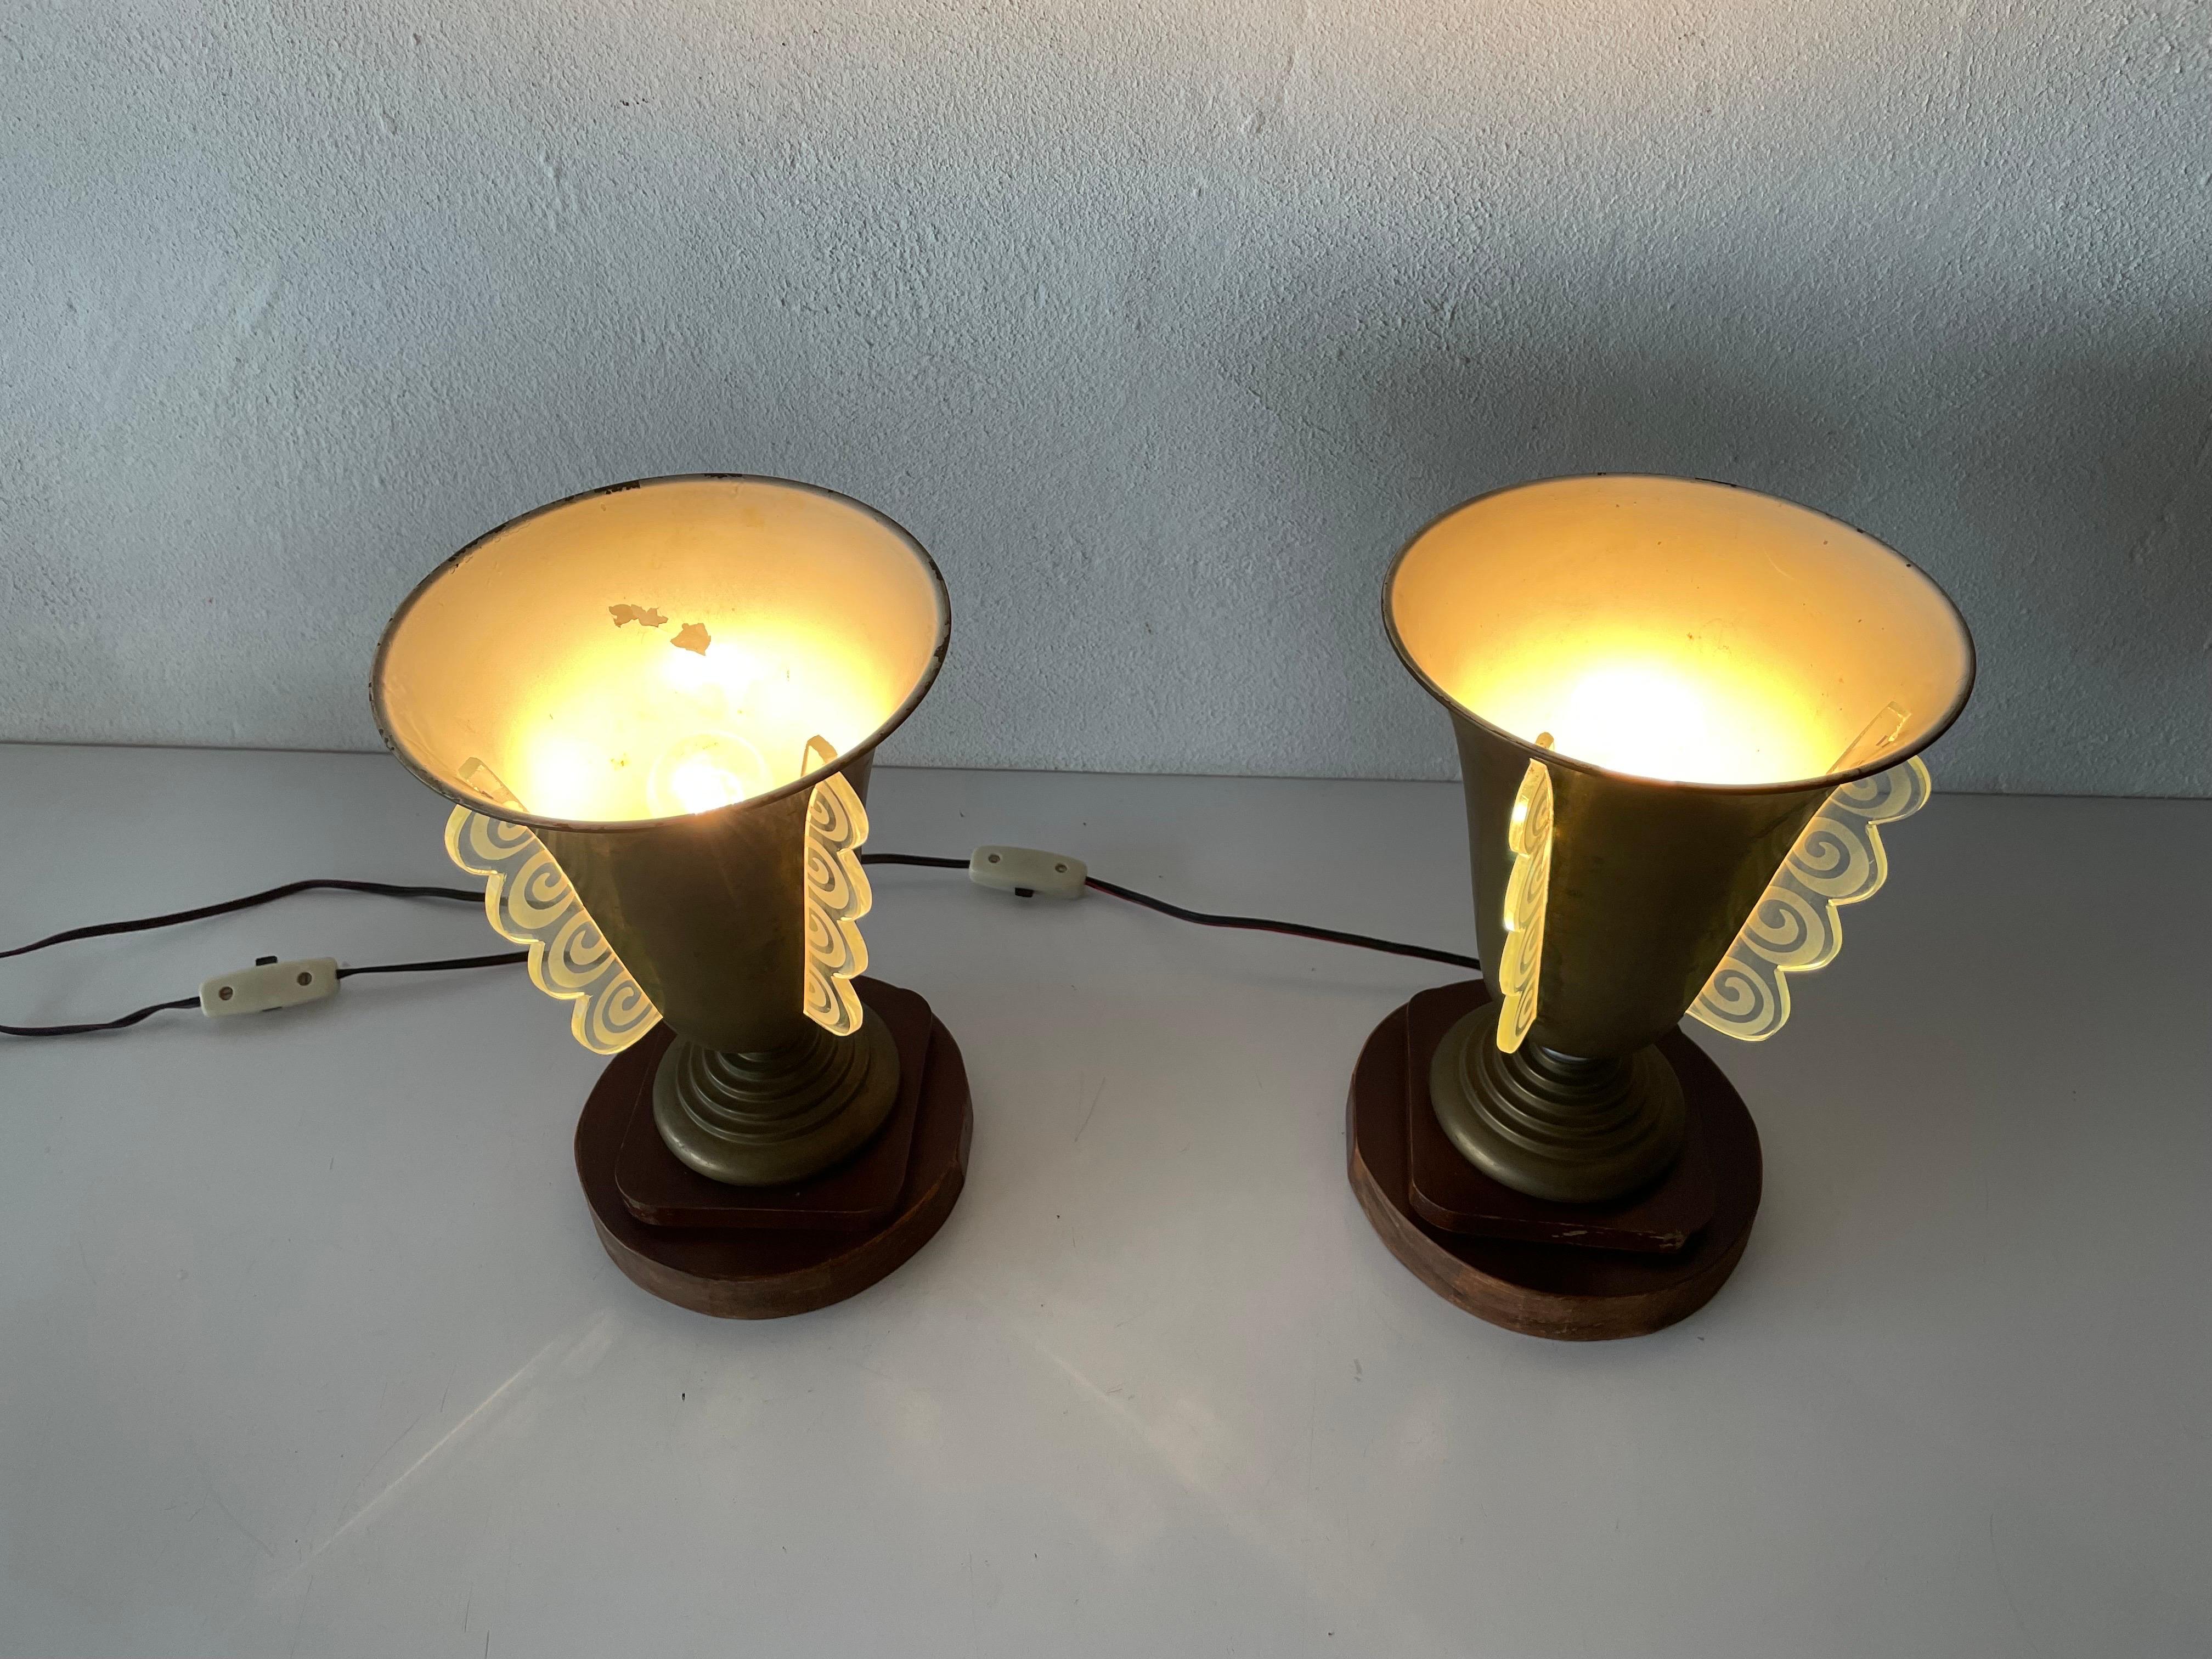 Art Deco Conic Design Pair of Table Lamps by Mazda, 1940s, France For Sale 11